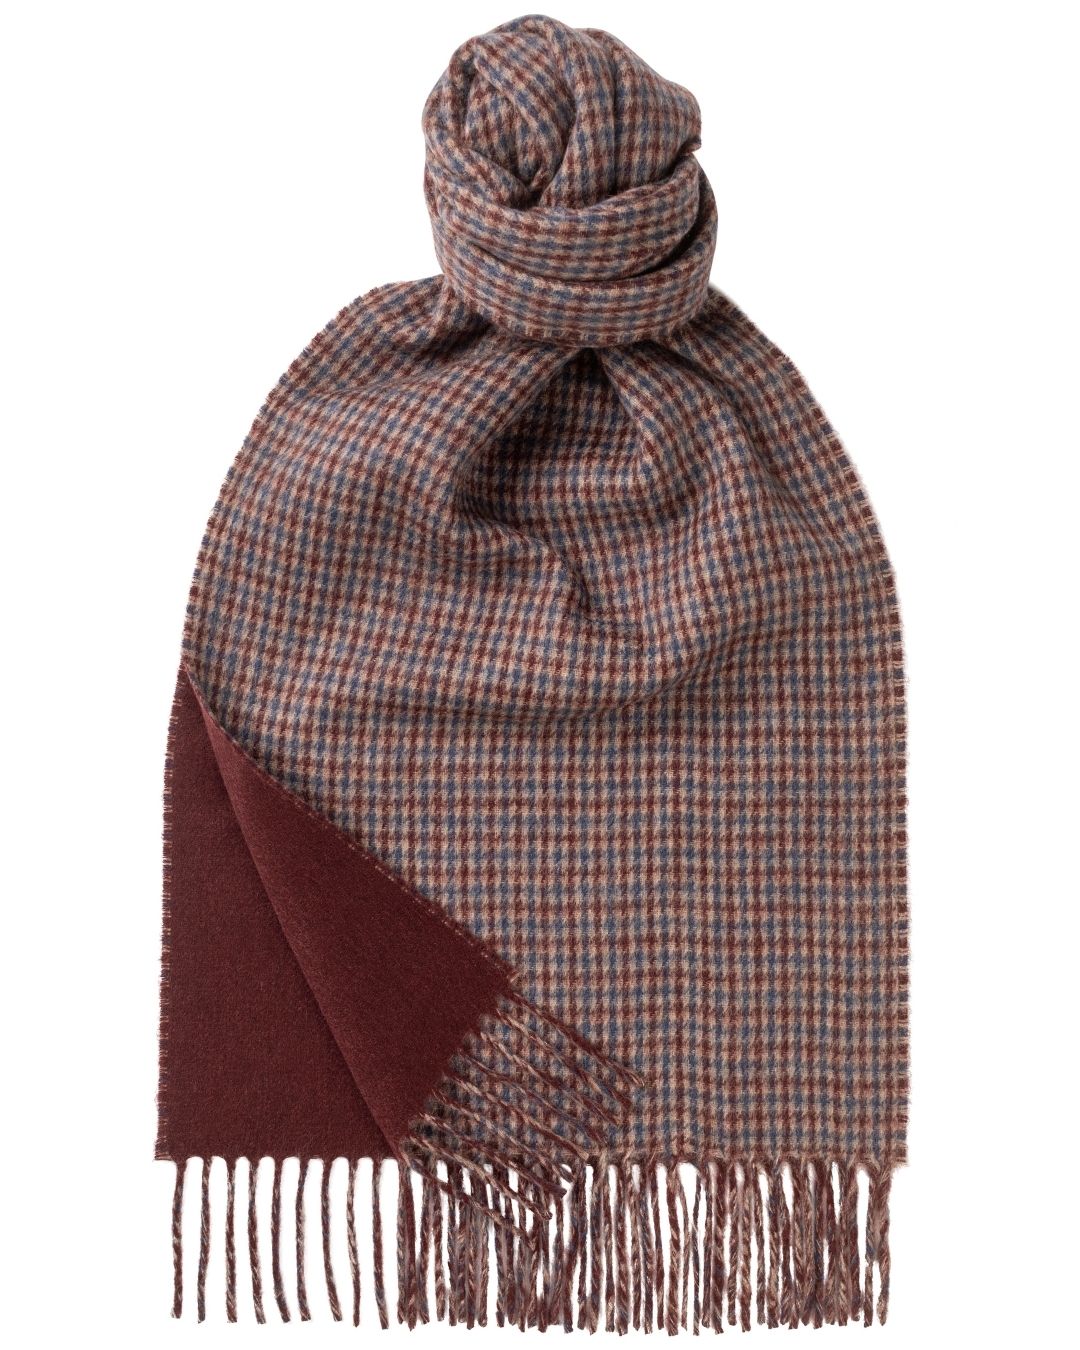 SALE - Double Faced Ripple Cashmere Scarf